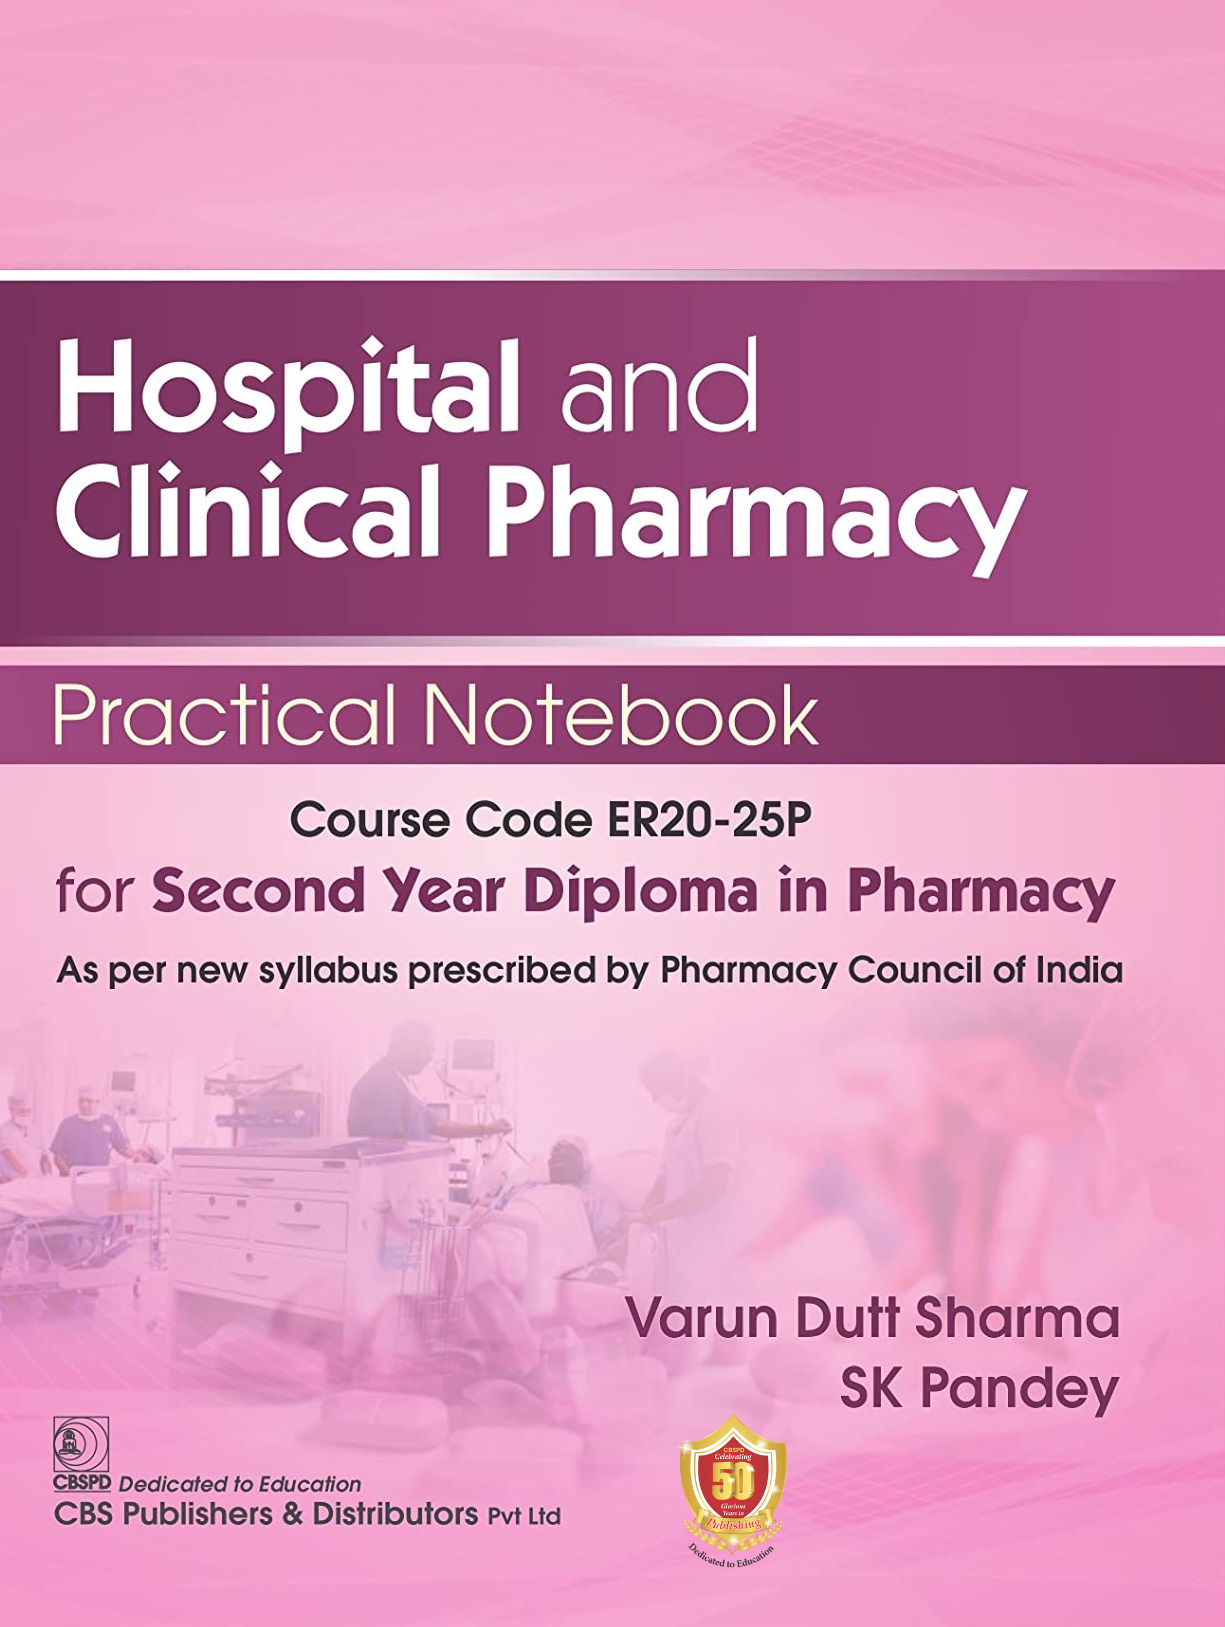 Hospital and Clinical Pharmacy Practical Notebook for Second Year Diploma in Pharmacy